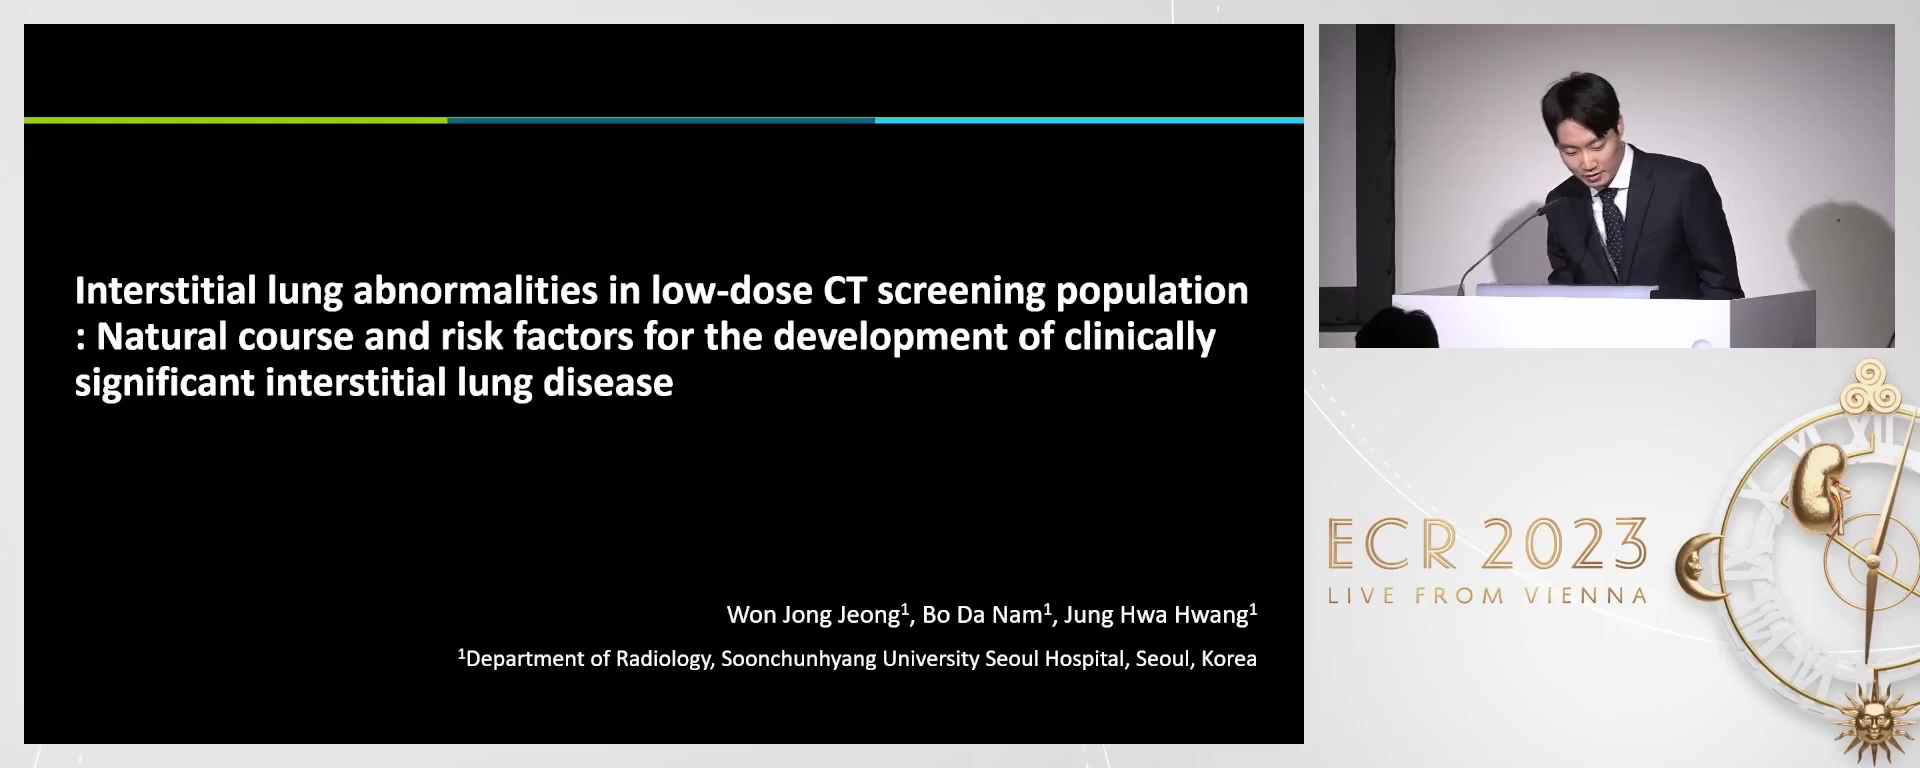 Interstitial lung abnormalities in low-dose CT screening population: risk factors for the development of clinically significant interstitial lung disease - Wonjong Jeong, Seoul / KR